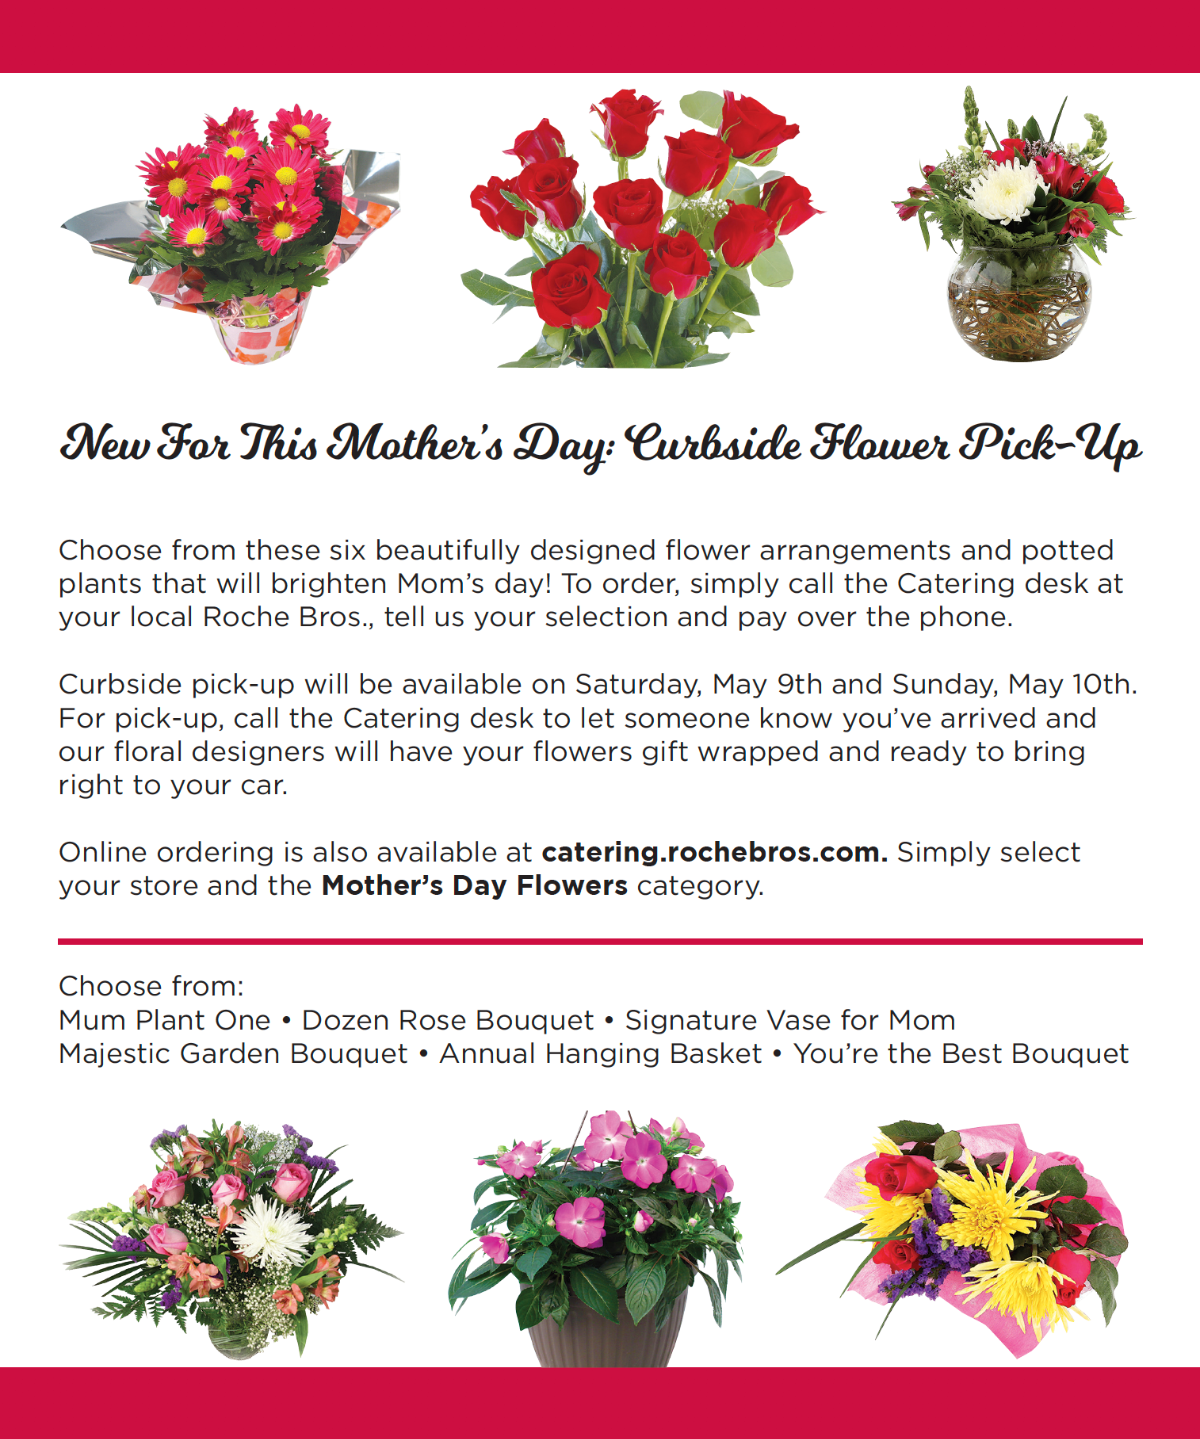 New For This Mother's Day: Curbside Flower Pick-Up. Choose from these six beautifully designed flower arrangements and potted plants that will brighten Mom's day! To order, simply call the Catering desk at your local Roche Bros., tell us your selection and pay over the phone. Curbside pick-up will be available on Saturday, May 9th and Sunday, May 10th. For pick-up, call the Catering desk to let someone know you've arrived and our floral designers will have your flowers gift wrapped and ready to bring right to your car. Online ordering is also available at catering.rochebros.com. Simply select your store and the Mother's Day Flowers category. Choose from: Mum Plant One, Dozen Rose Bouquet, Signature Vase for Mom, Majestic Garden Bouquet, Annual Hanging Basket, You're the Best Bouquet